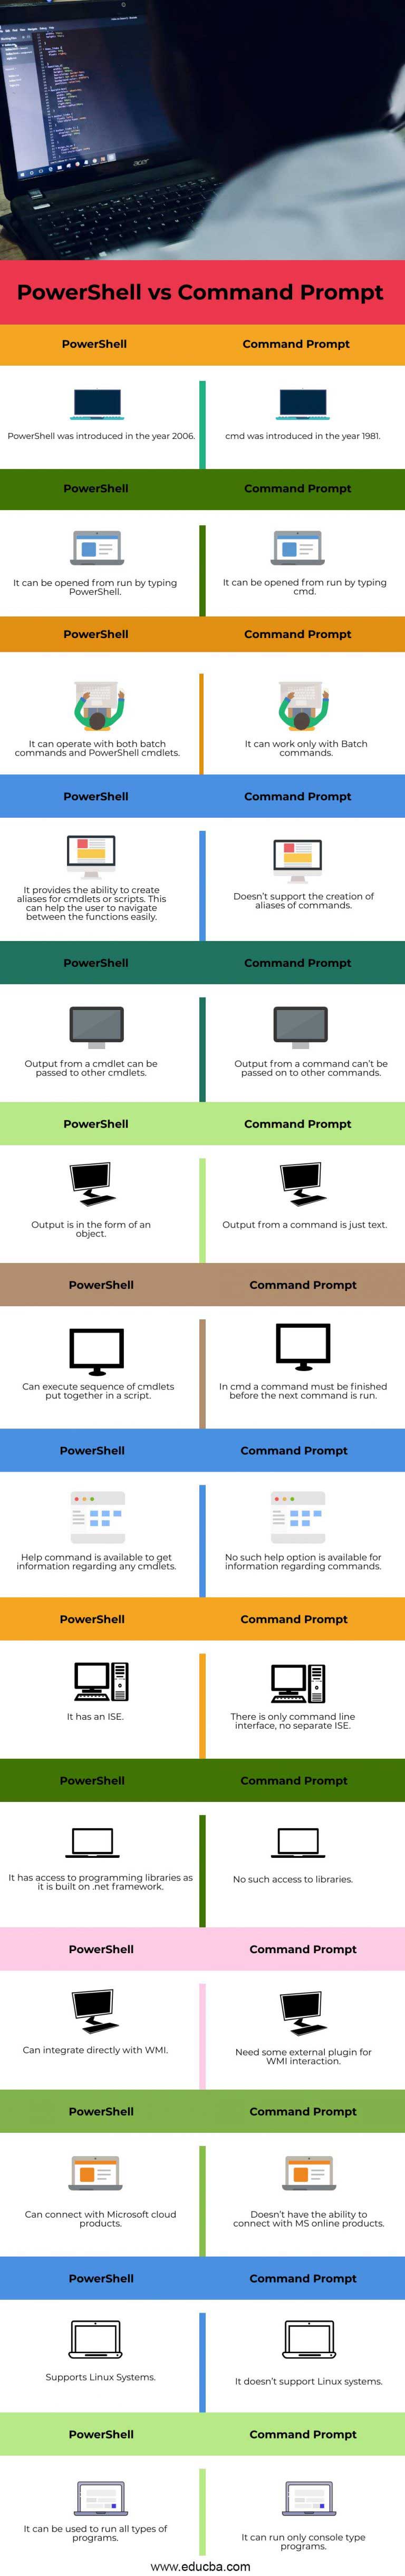 Powershell Vs Command Prompt Top 14 Differences You Should Know 1021